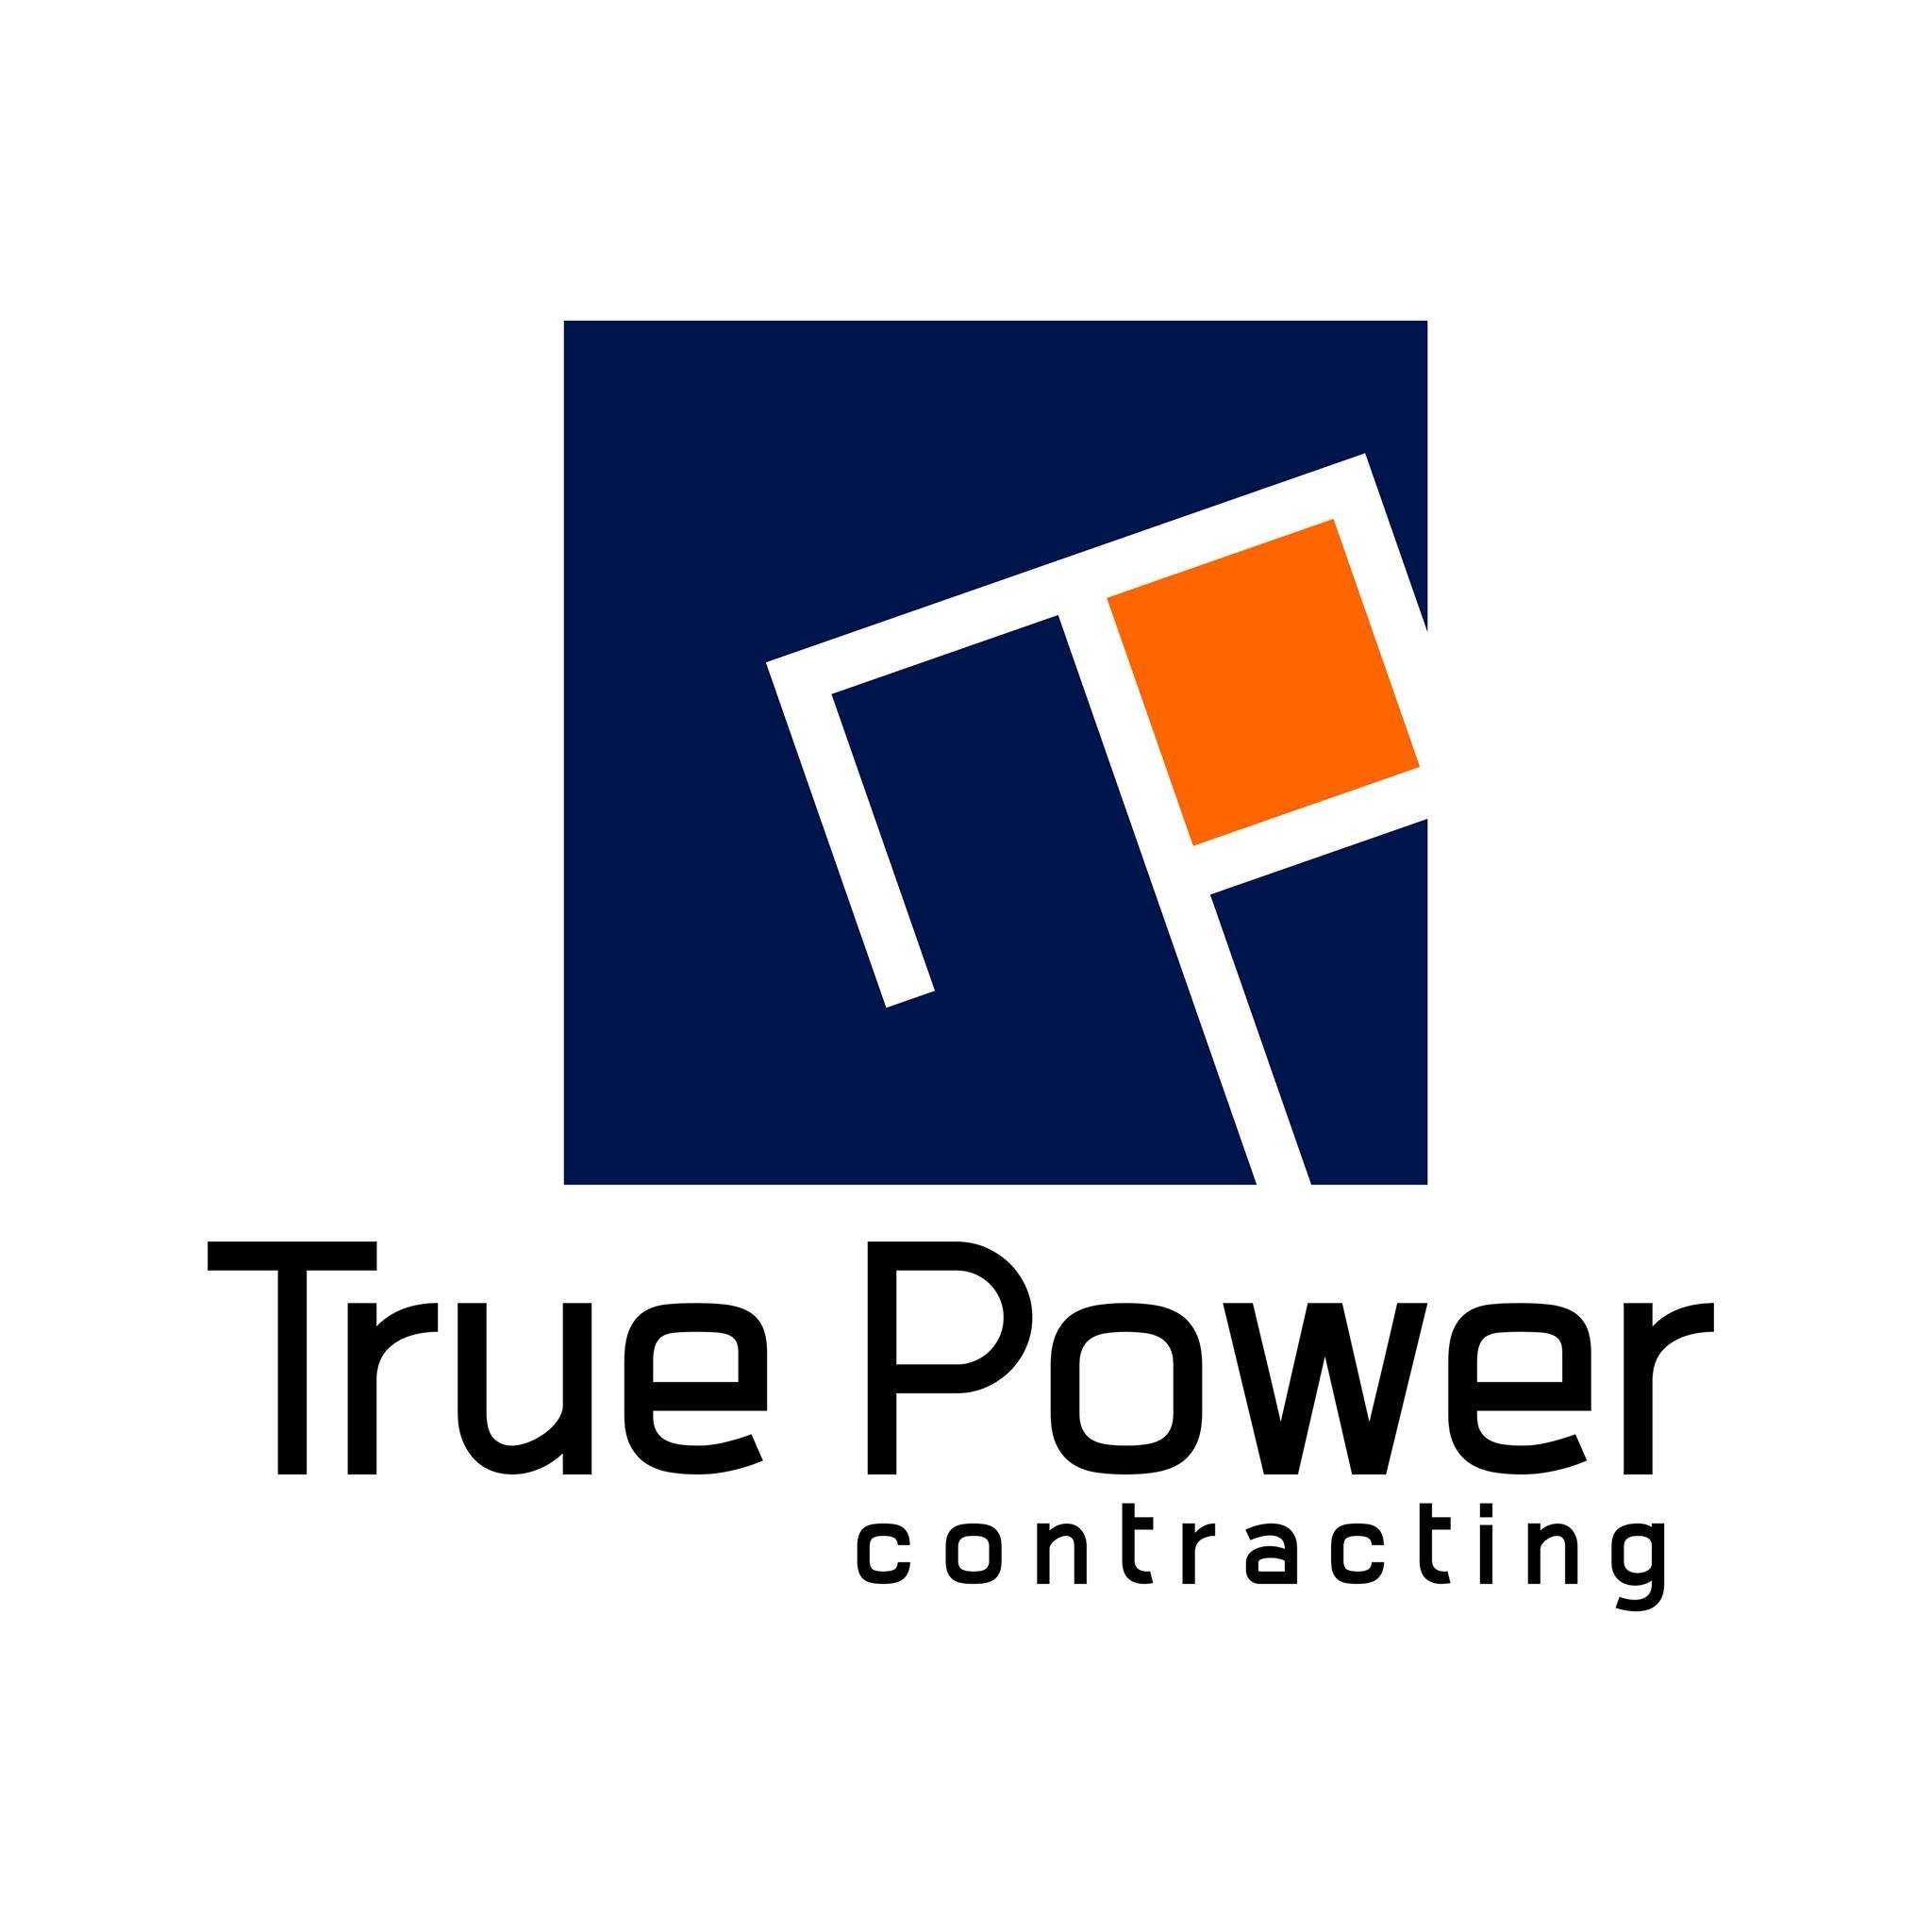 TRUE POWER For Contracting